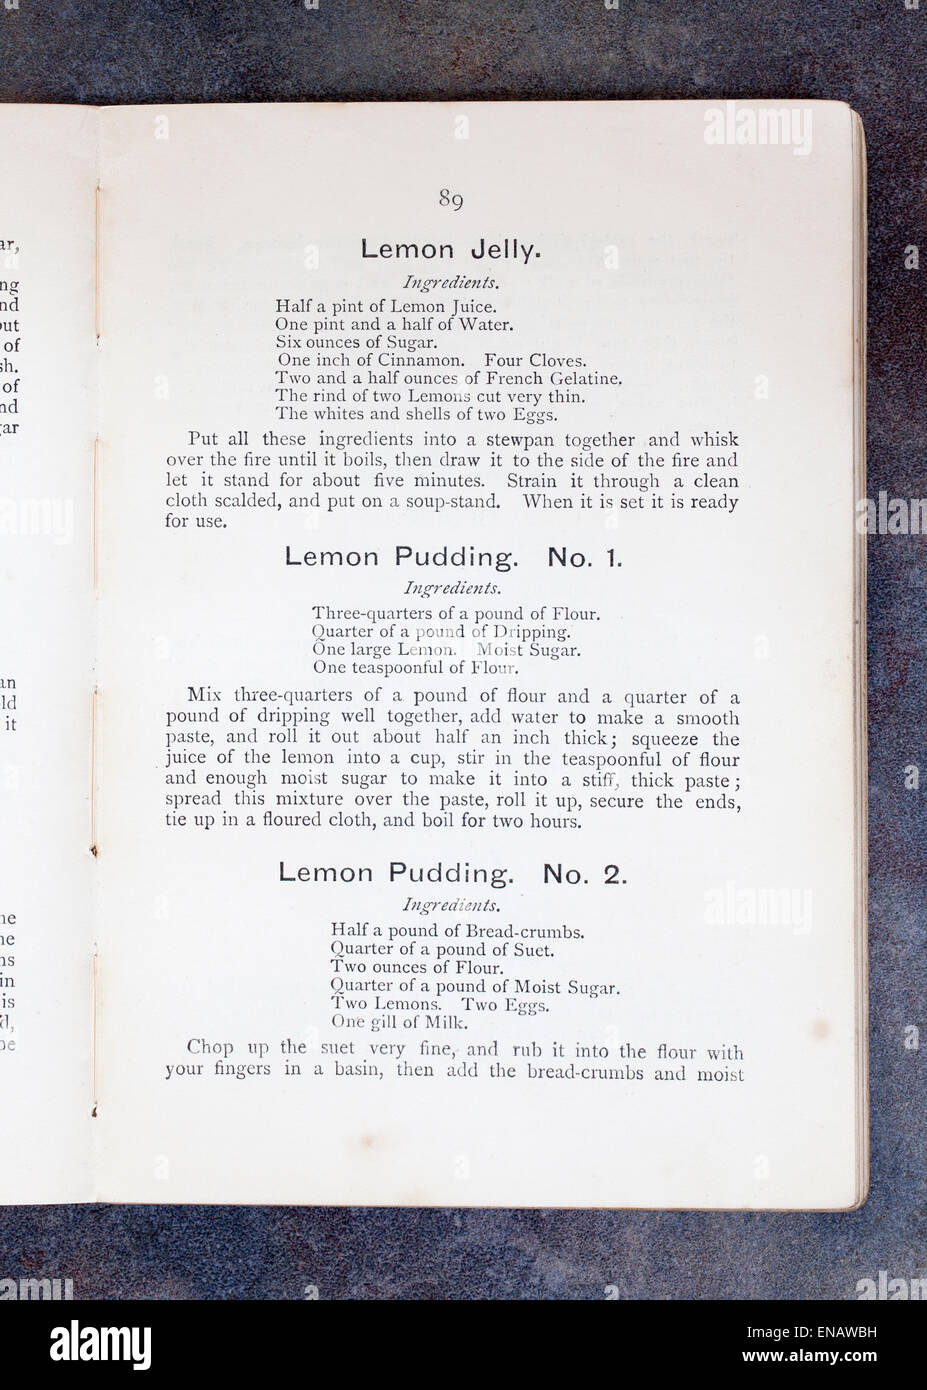 Lemon Jelly and Pudding Recipes from Plain Cookery Recipe Book by Mrs Charles Clarke for the National Training School Stock Photo